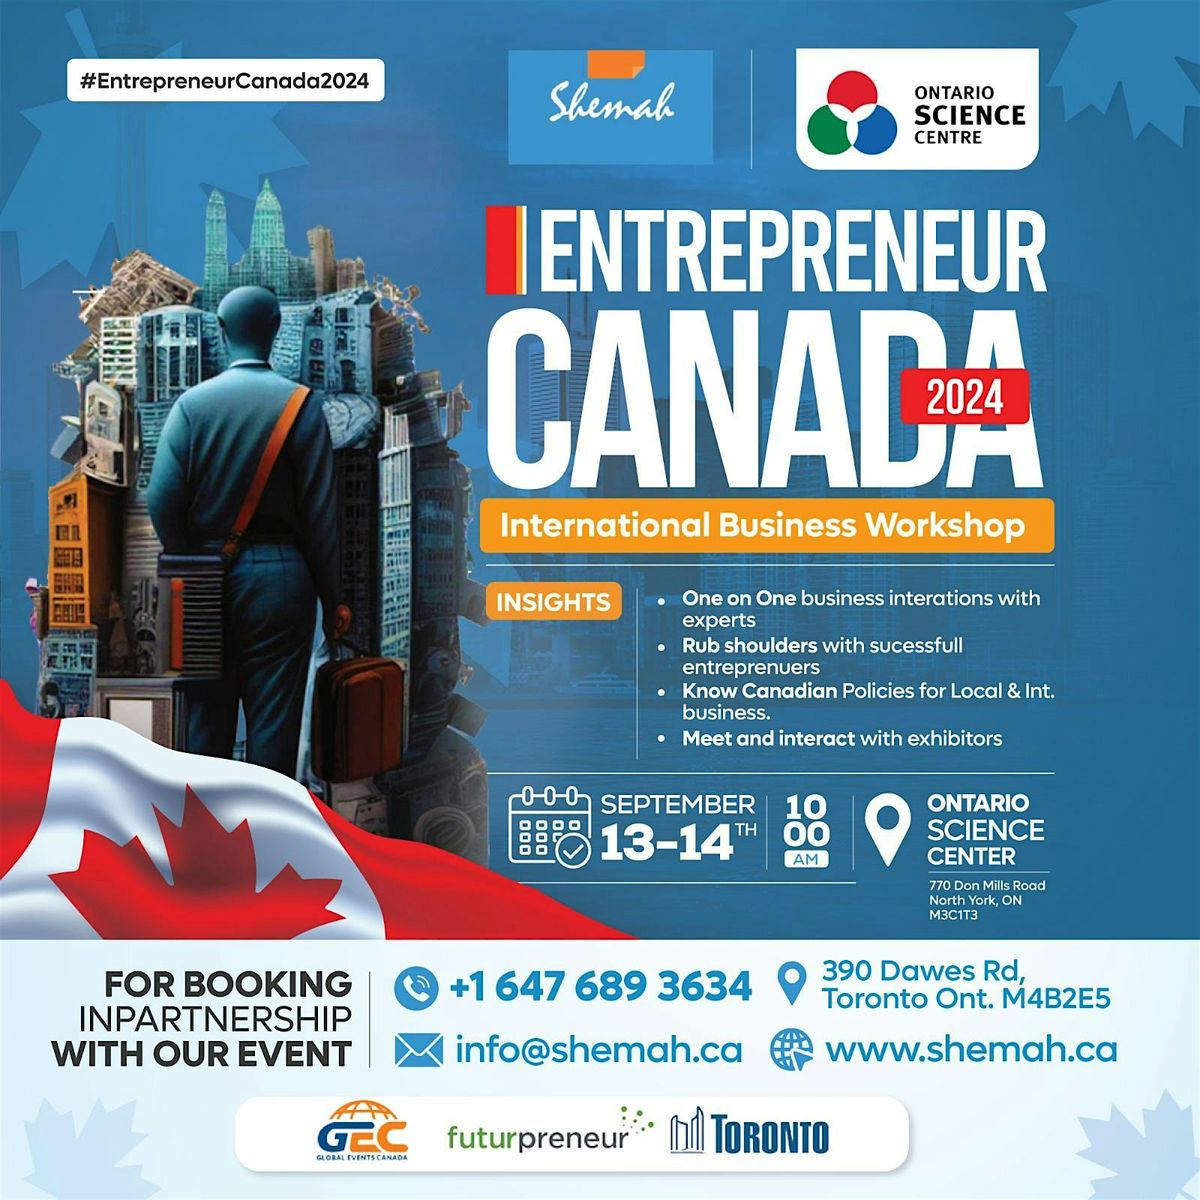 TRADE MISSION TO THE 2024 ENTREPRENEUR CANADA BUSINESS WORKSHOP